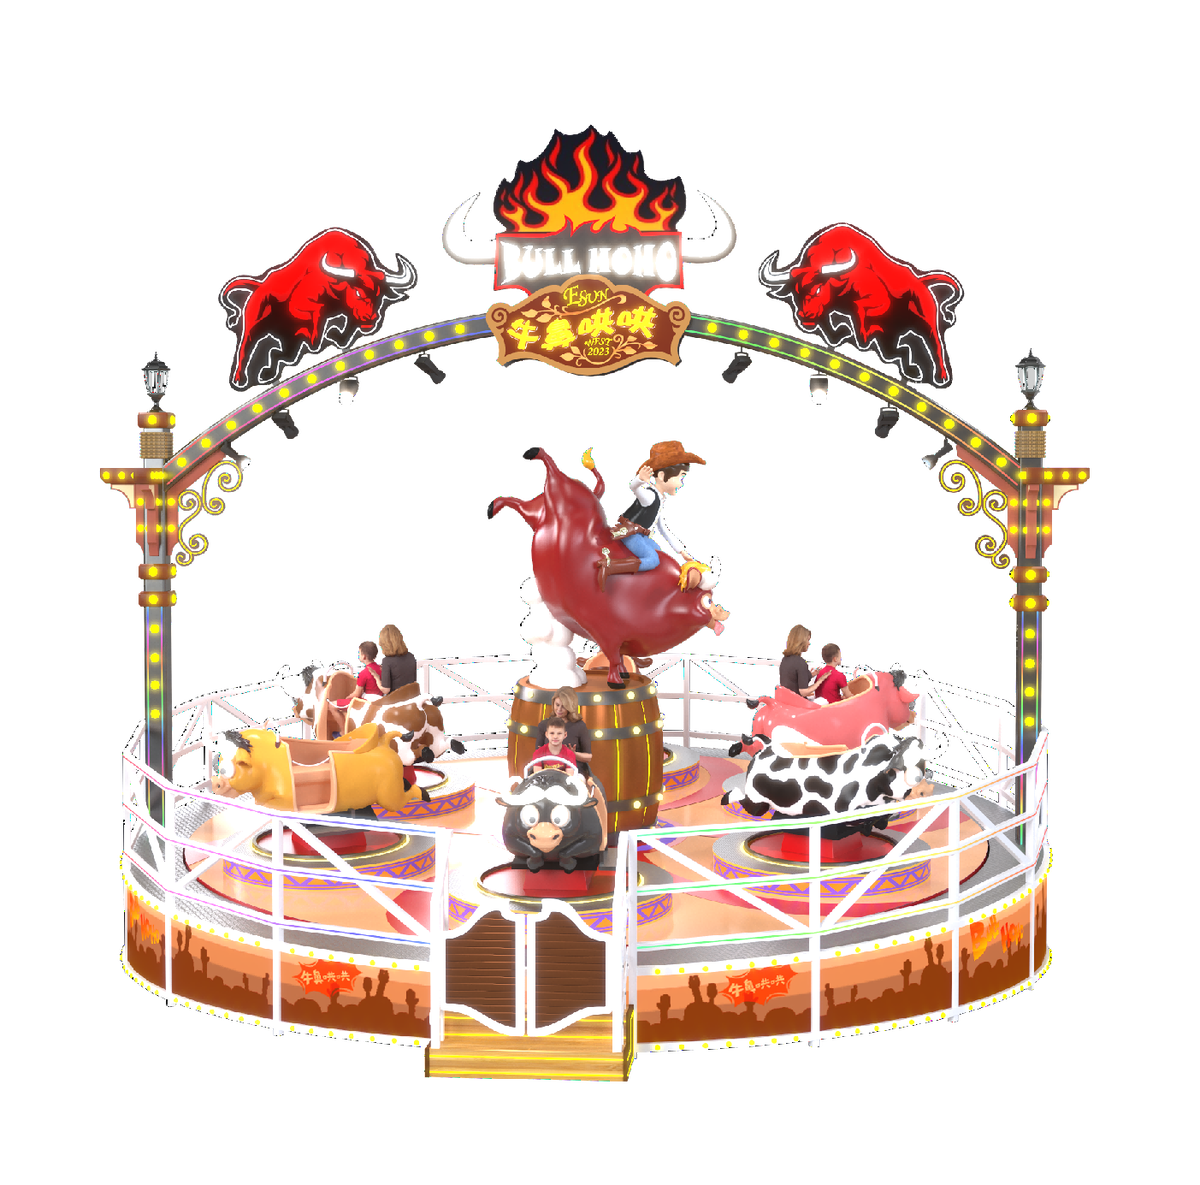 "Wild West Adventure Bull Ride: 12-Seat Crazy Bullfighting and Spinning Carousel Combo"